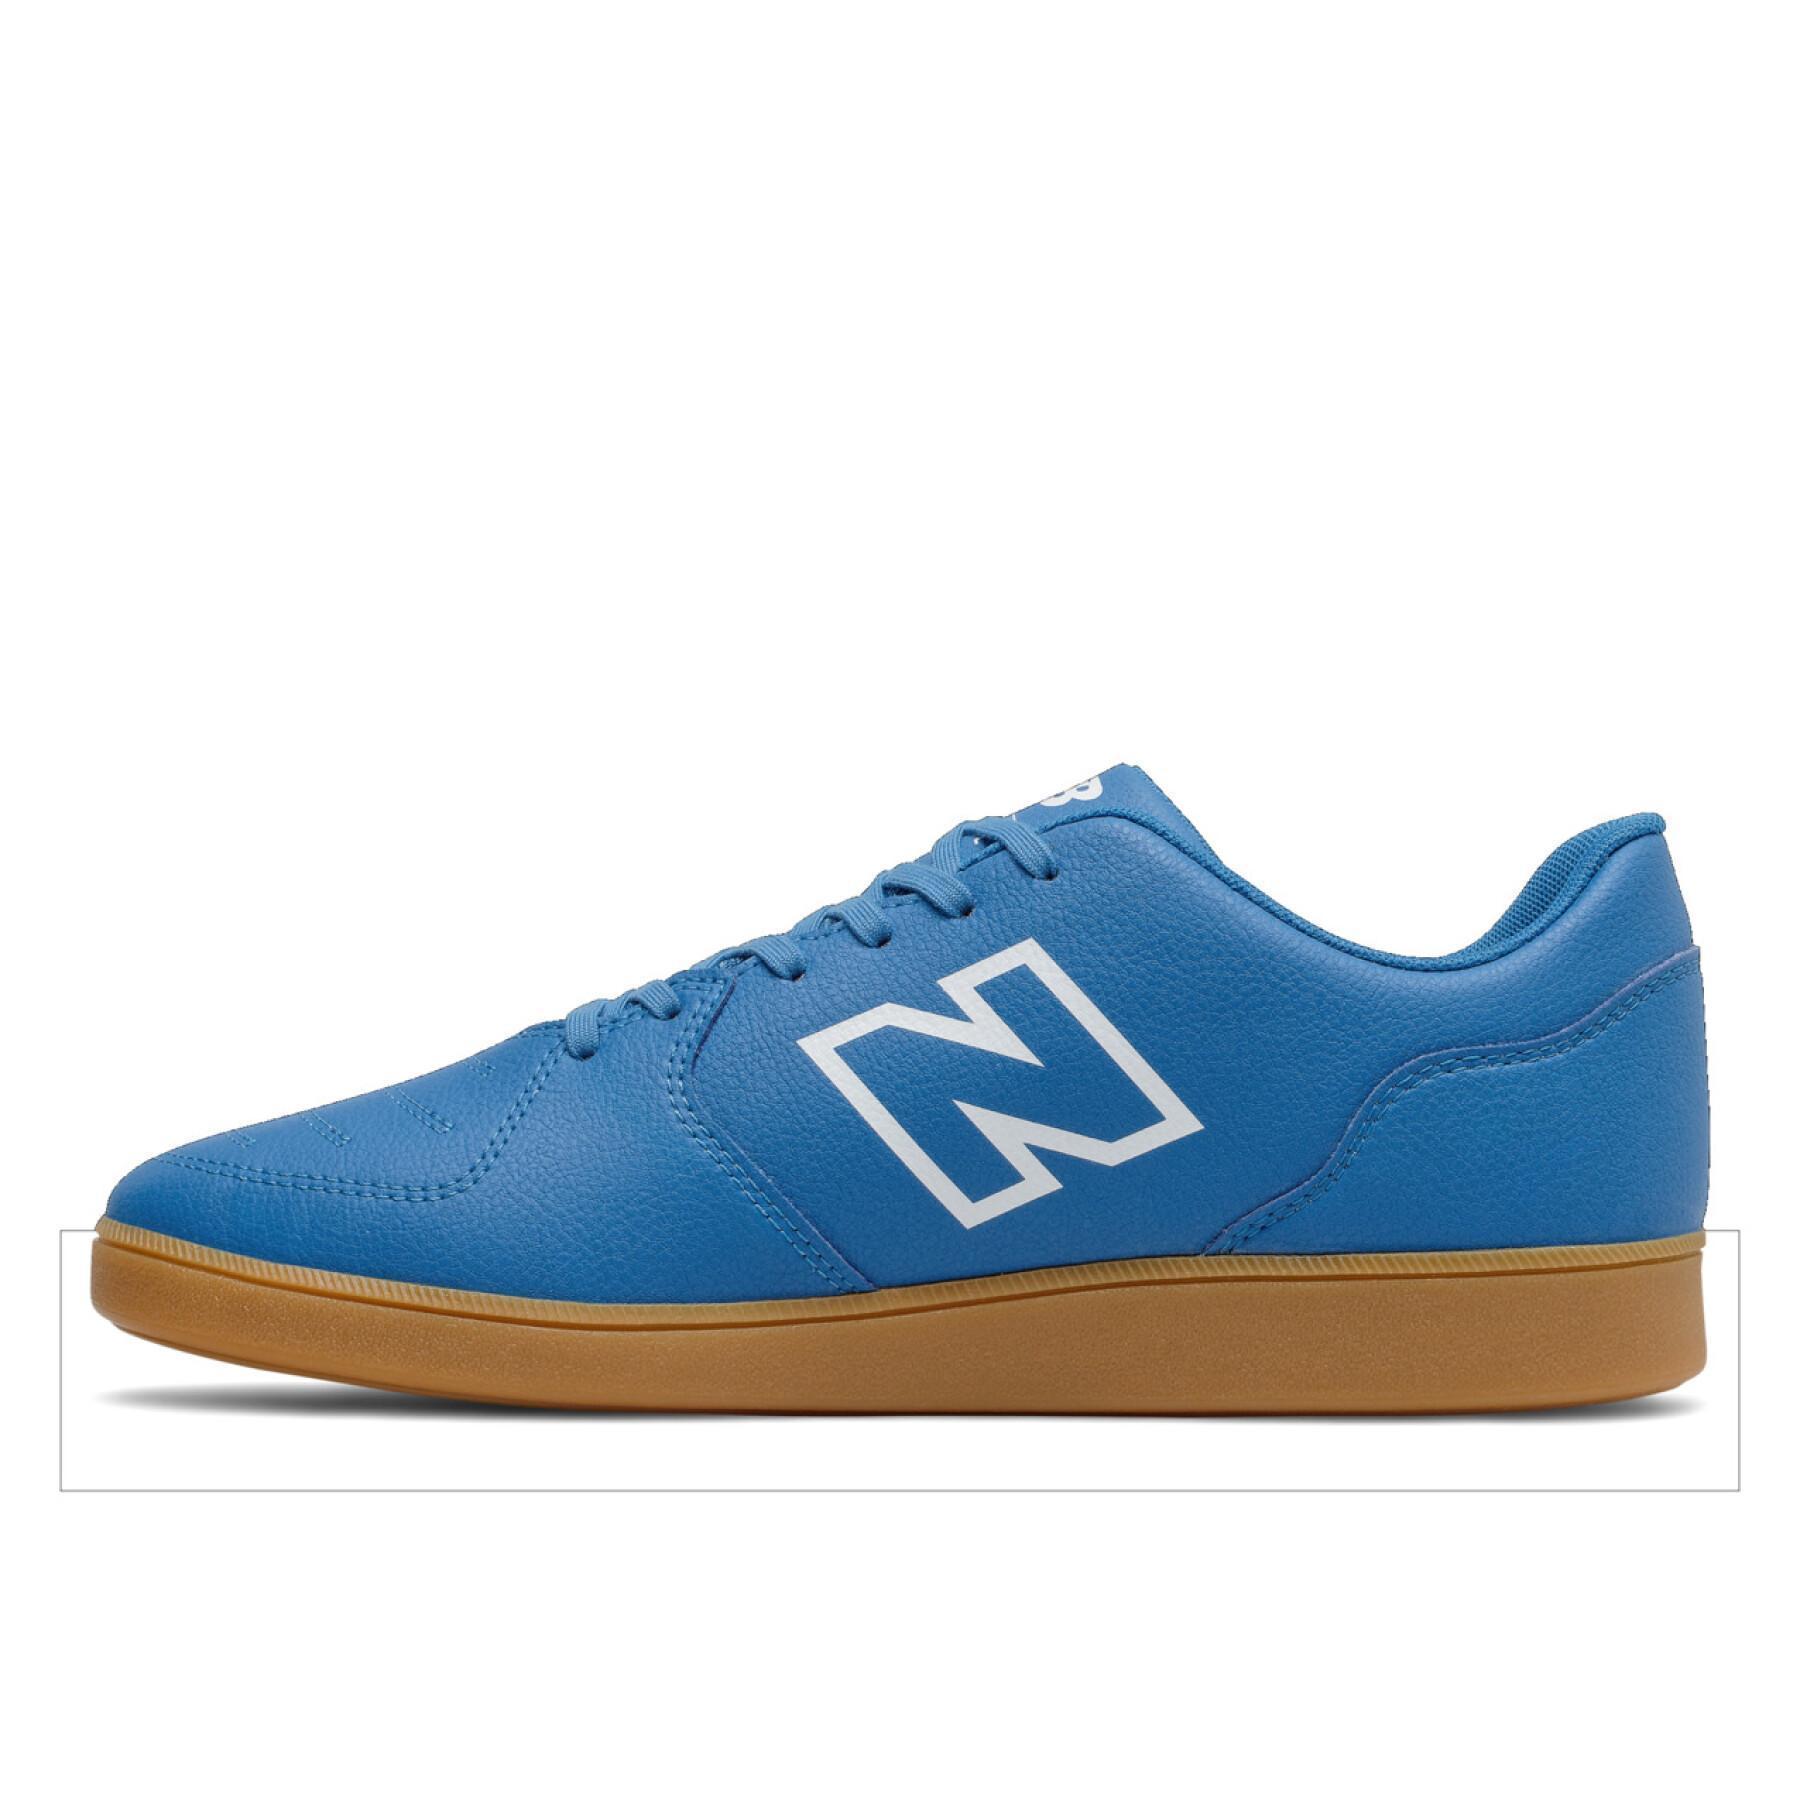 Chaussures New Balance Audazo Comm IN